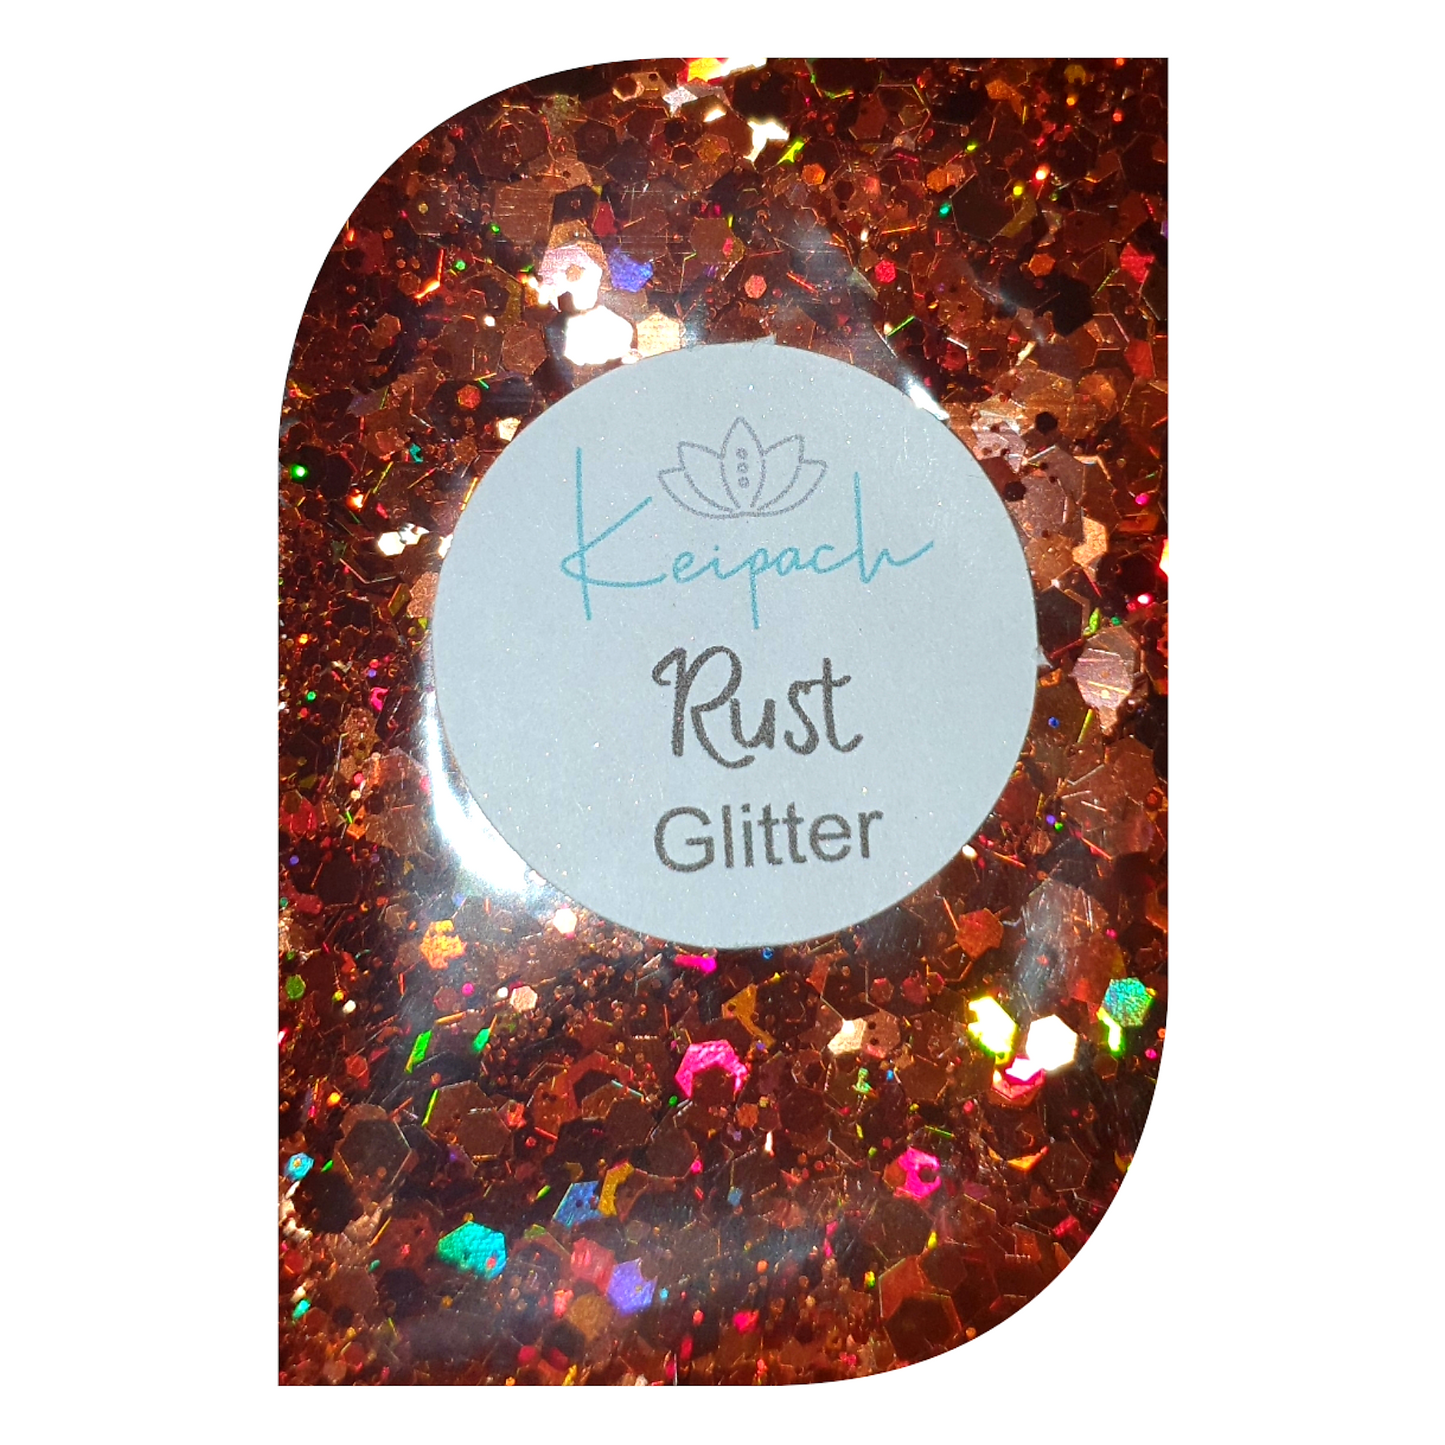 Chunky Holographic Glitter - Rust - Keipach